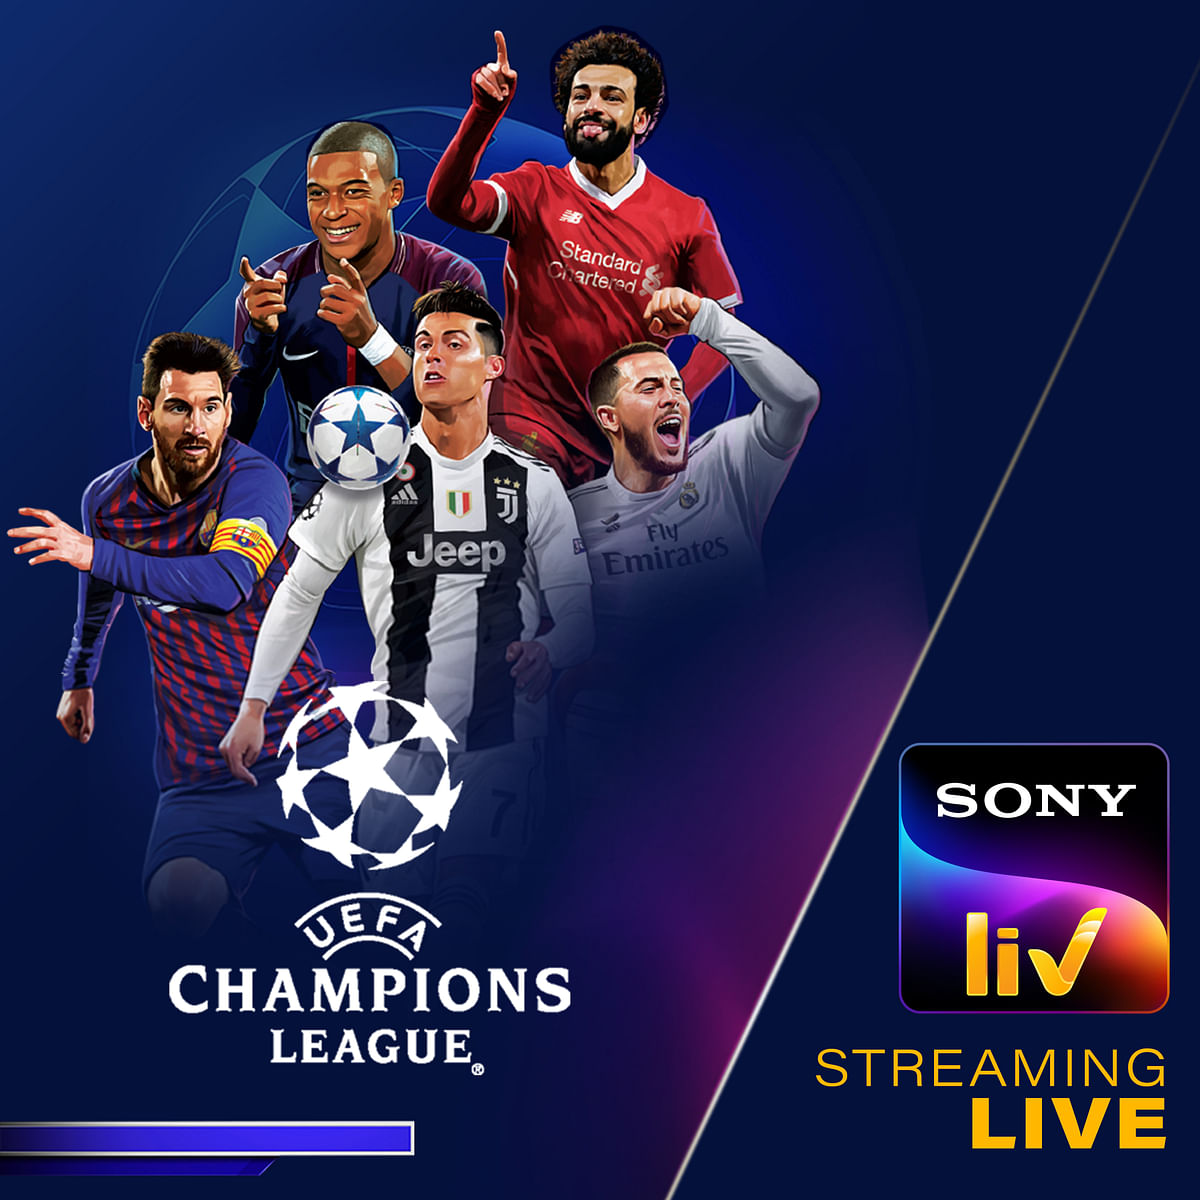 Be it sports or entertainment, SonyLIV is clearly your one-stop destination for great content.